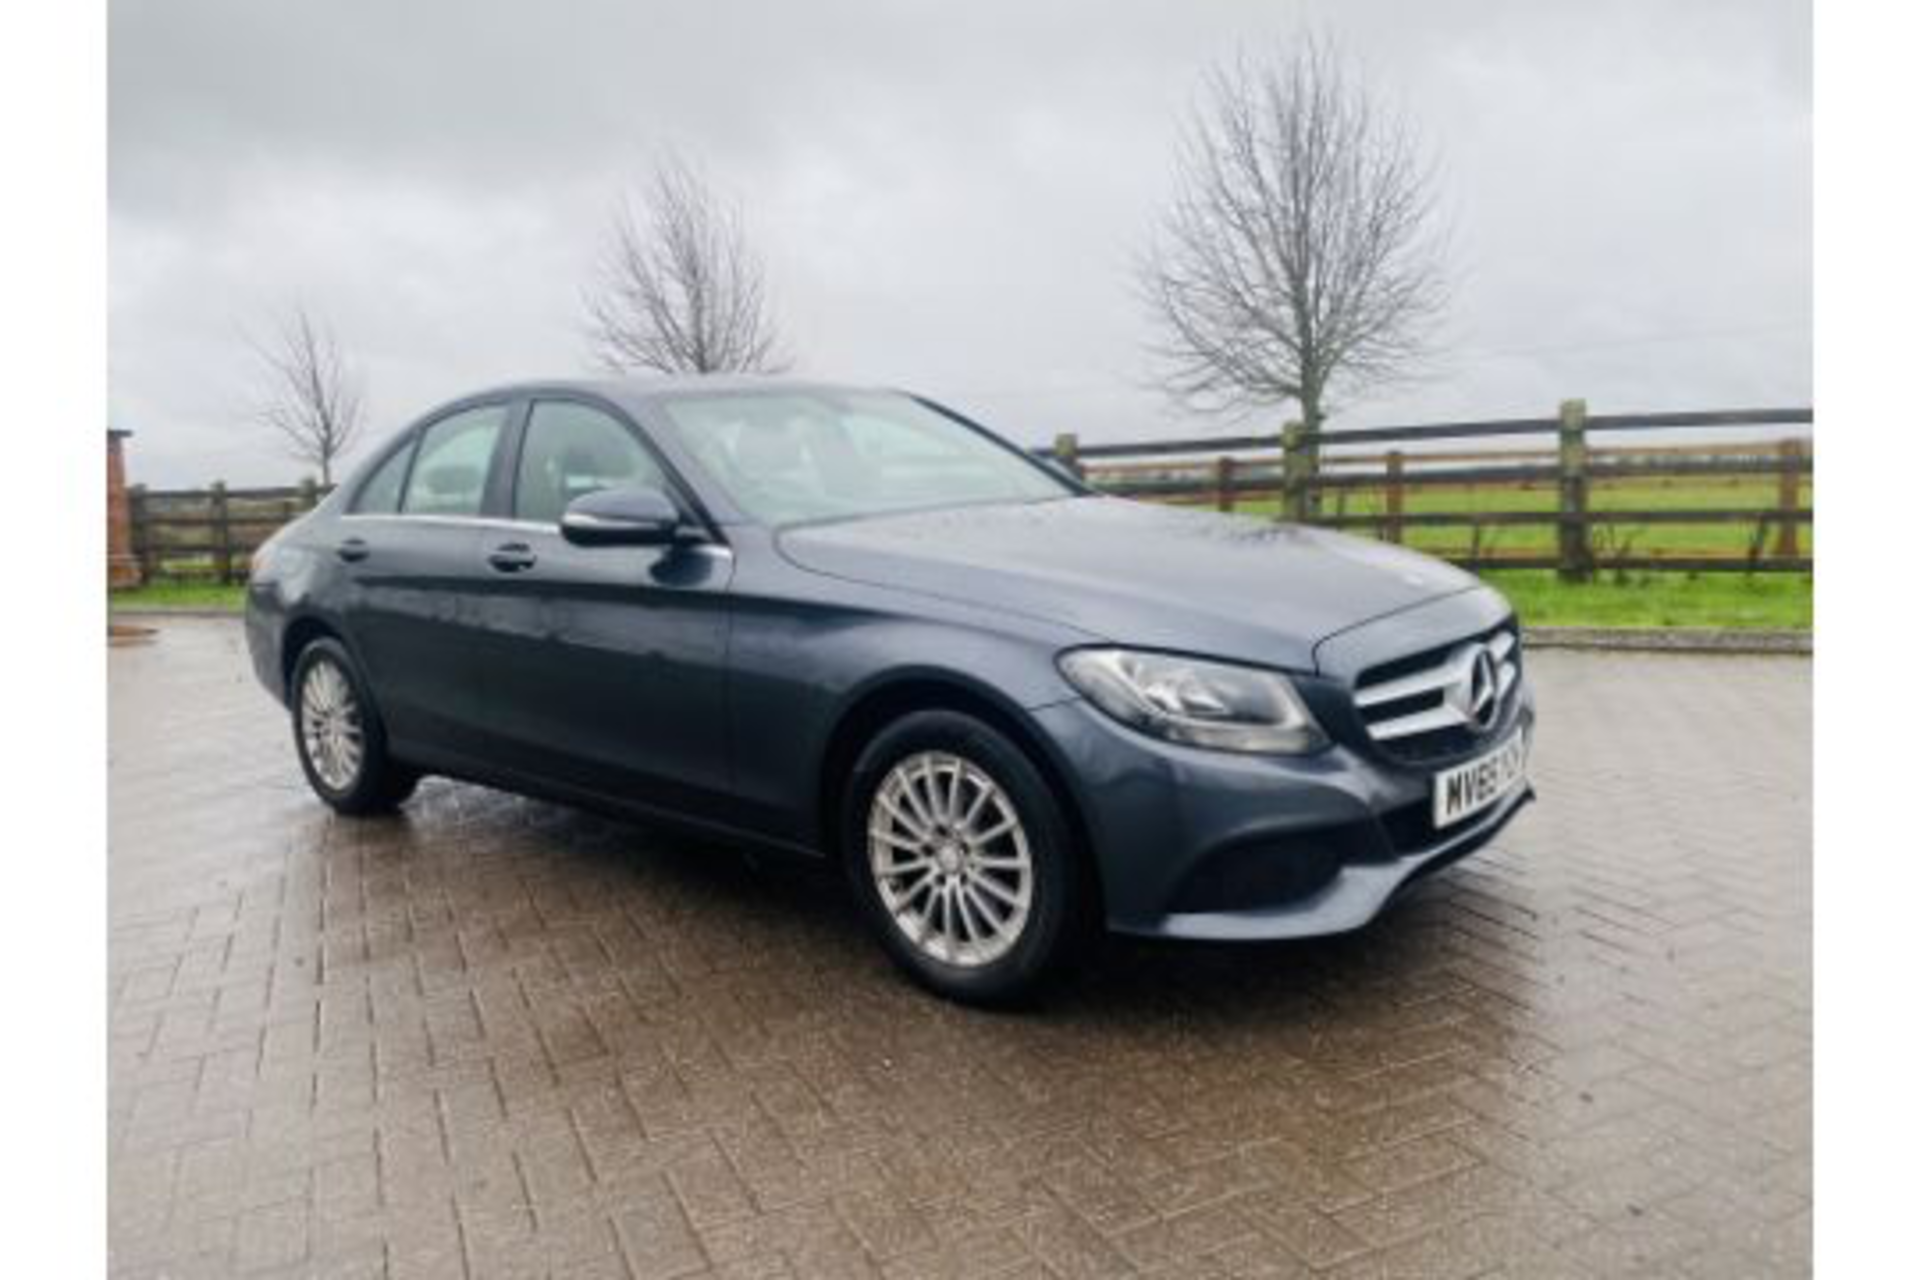 MERCEDES C220d "SPECIAL EQUIPMENT" SE SALOON - 2016 MODEL - LEATHER - NEW SHAPE - AIR CON - NO VAT!! - Image 2 of 26